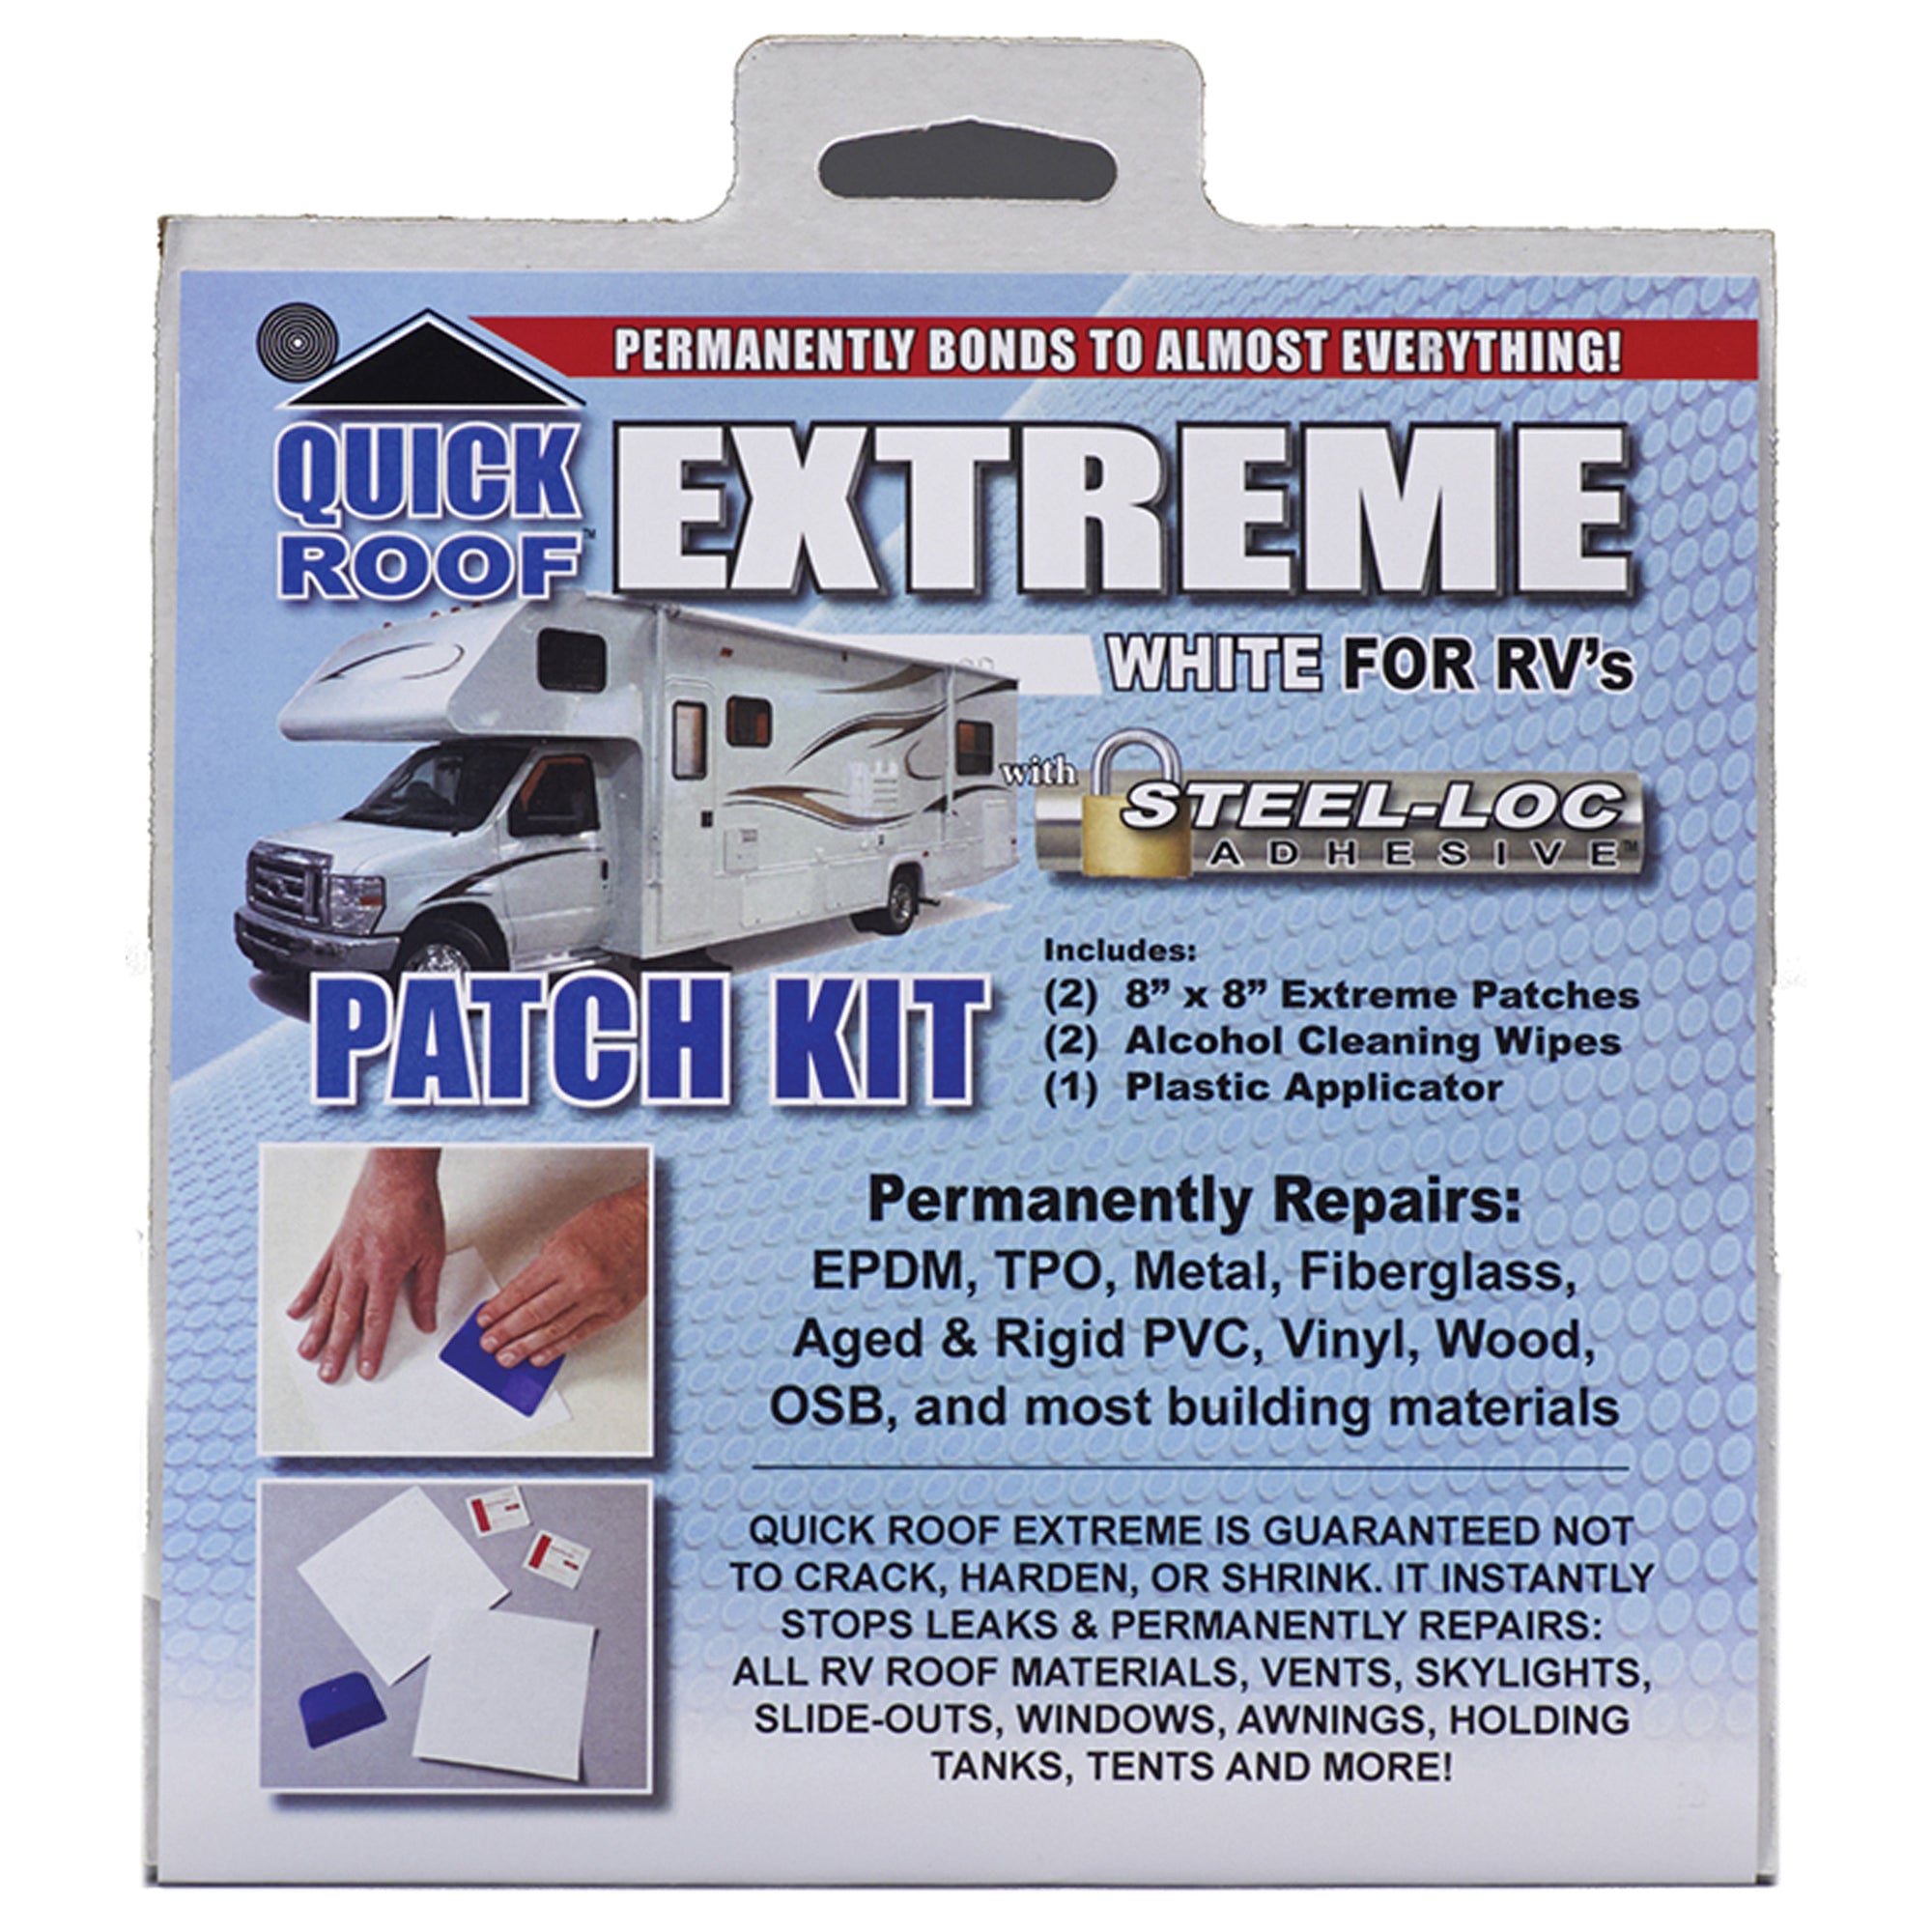 Cofair Products UBE88 Quick Roof Extreme Patch Kit With Applicator - 8" x 8" (2 Pack)